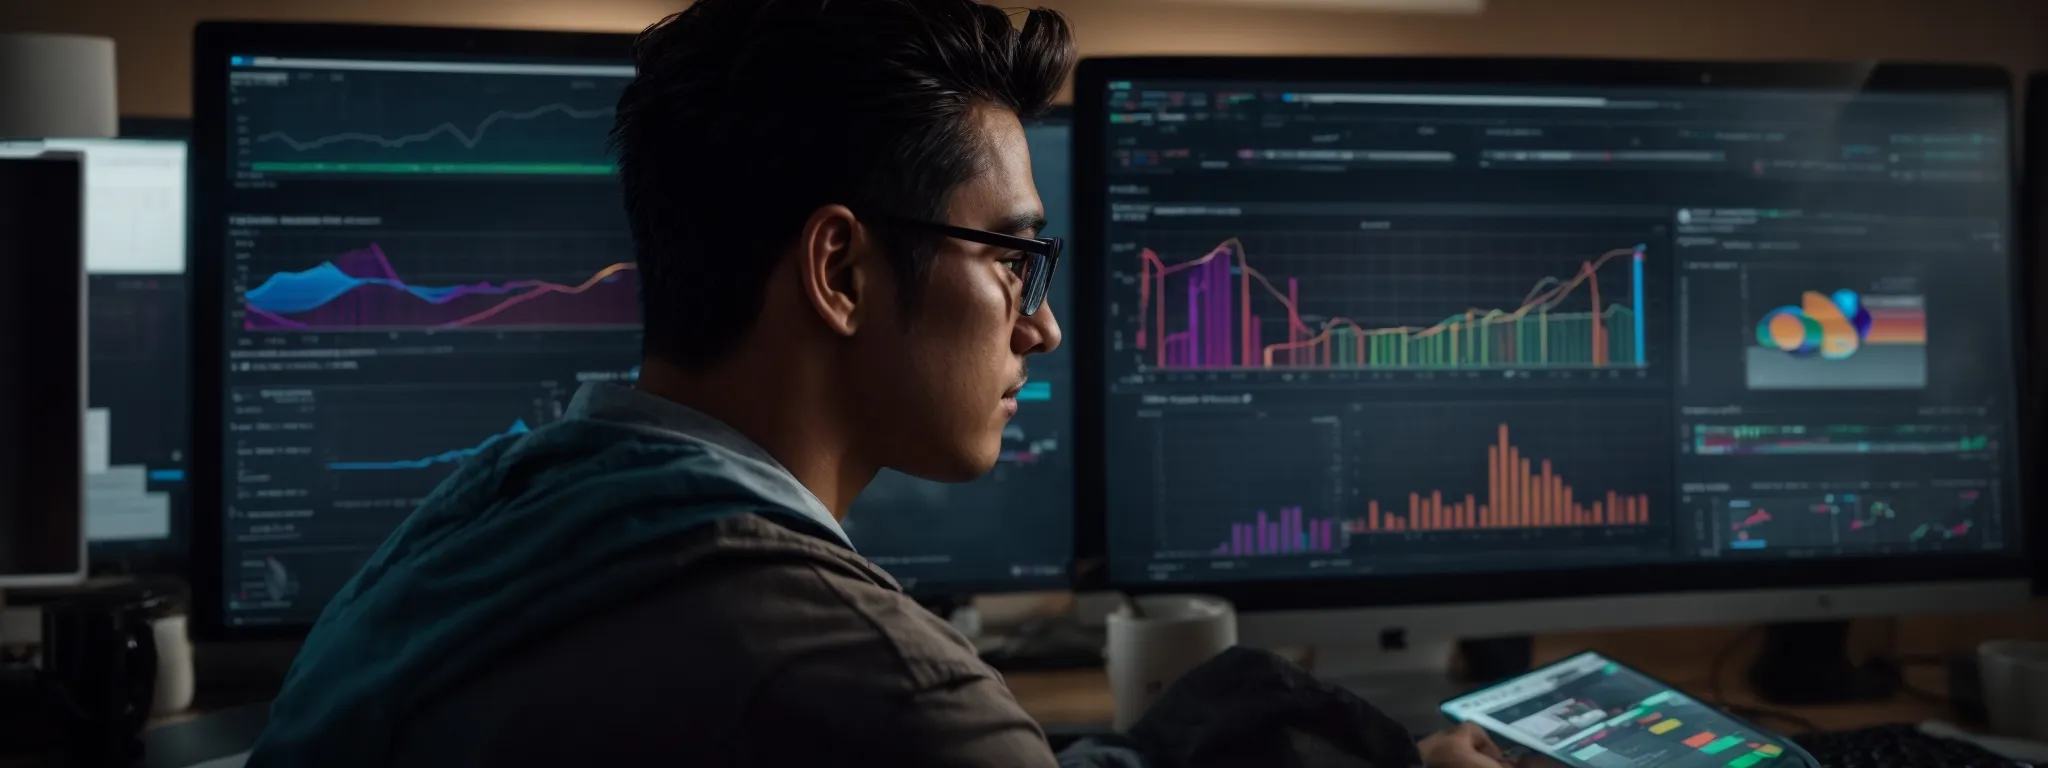 a focused individual gazes at a computer screen displaying colorful graphs and analytics related to website traffic and keyword performance.